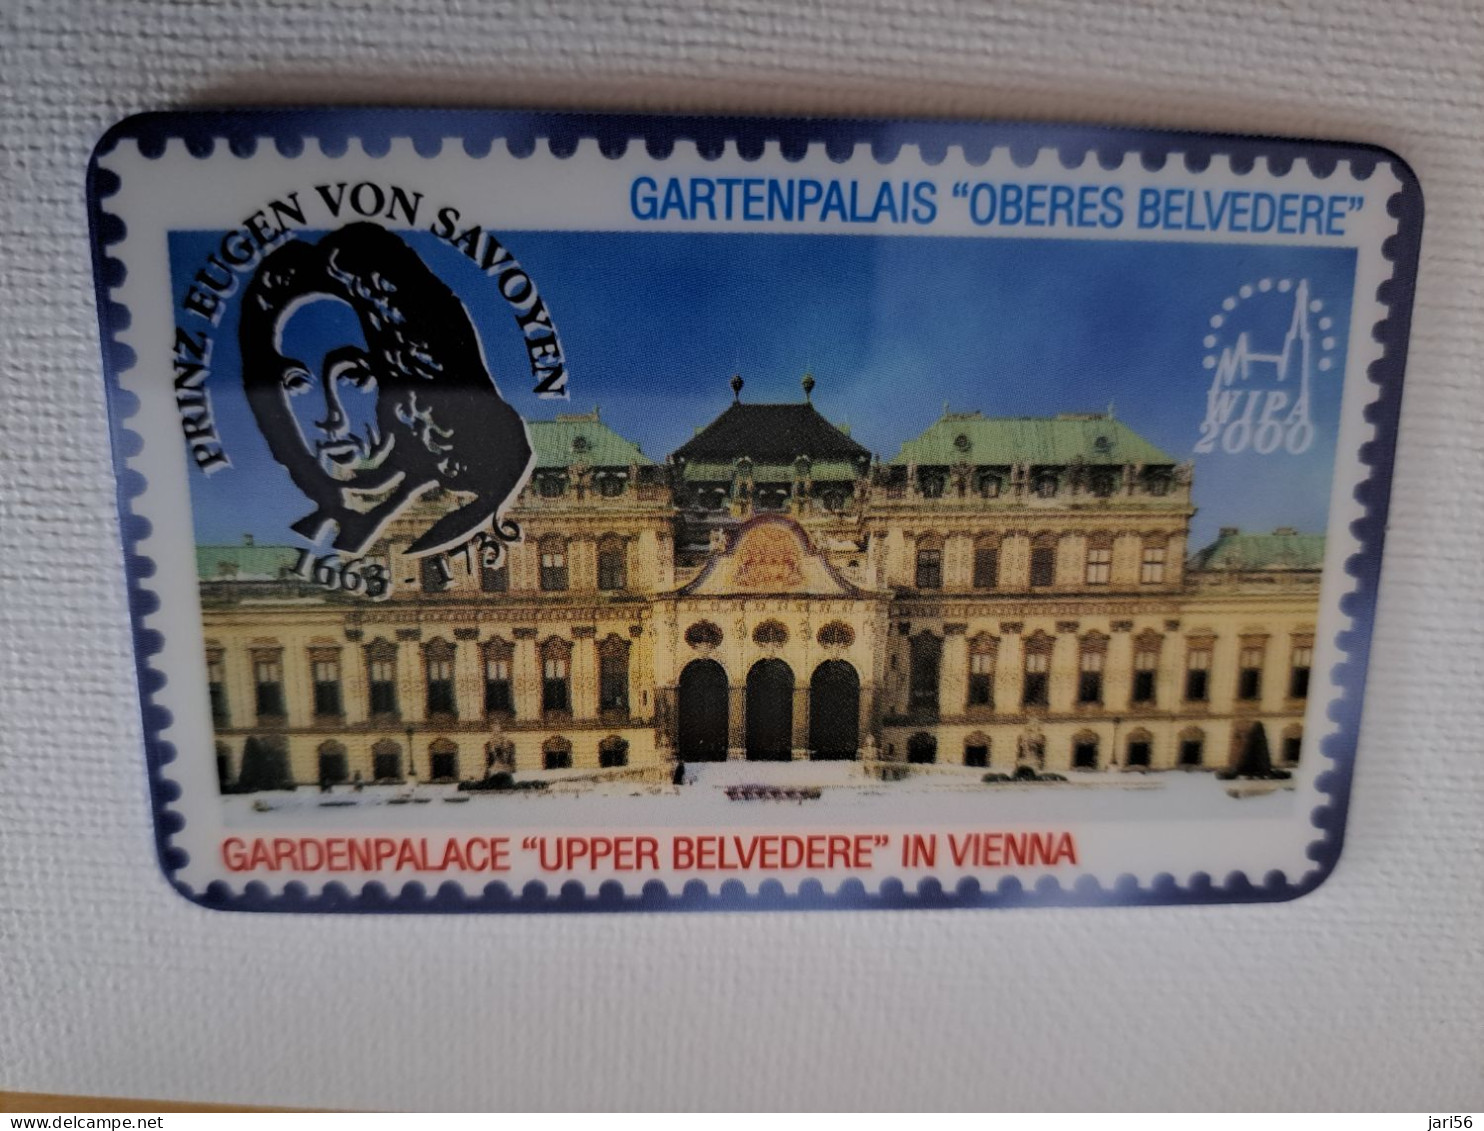 GREAT BRITAIN /20 UNITS / VIENNA/ GARTENPALAIS/ BELVEDERE / STAMPS ON CARD / (date 05/00) PREPAID CARD / MINT  **15756** - Collections